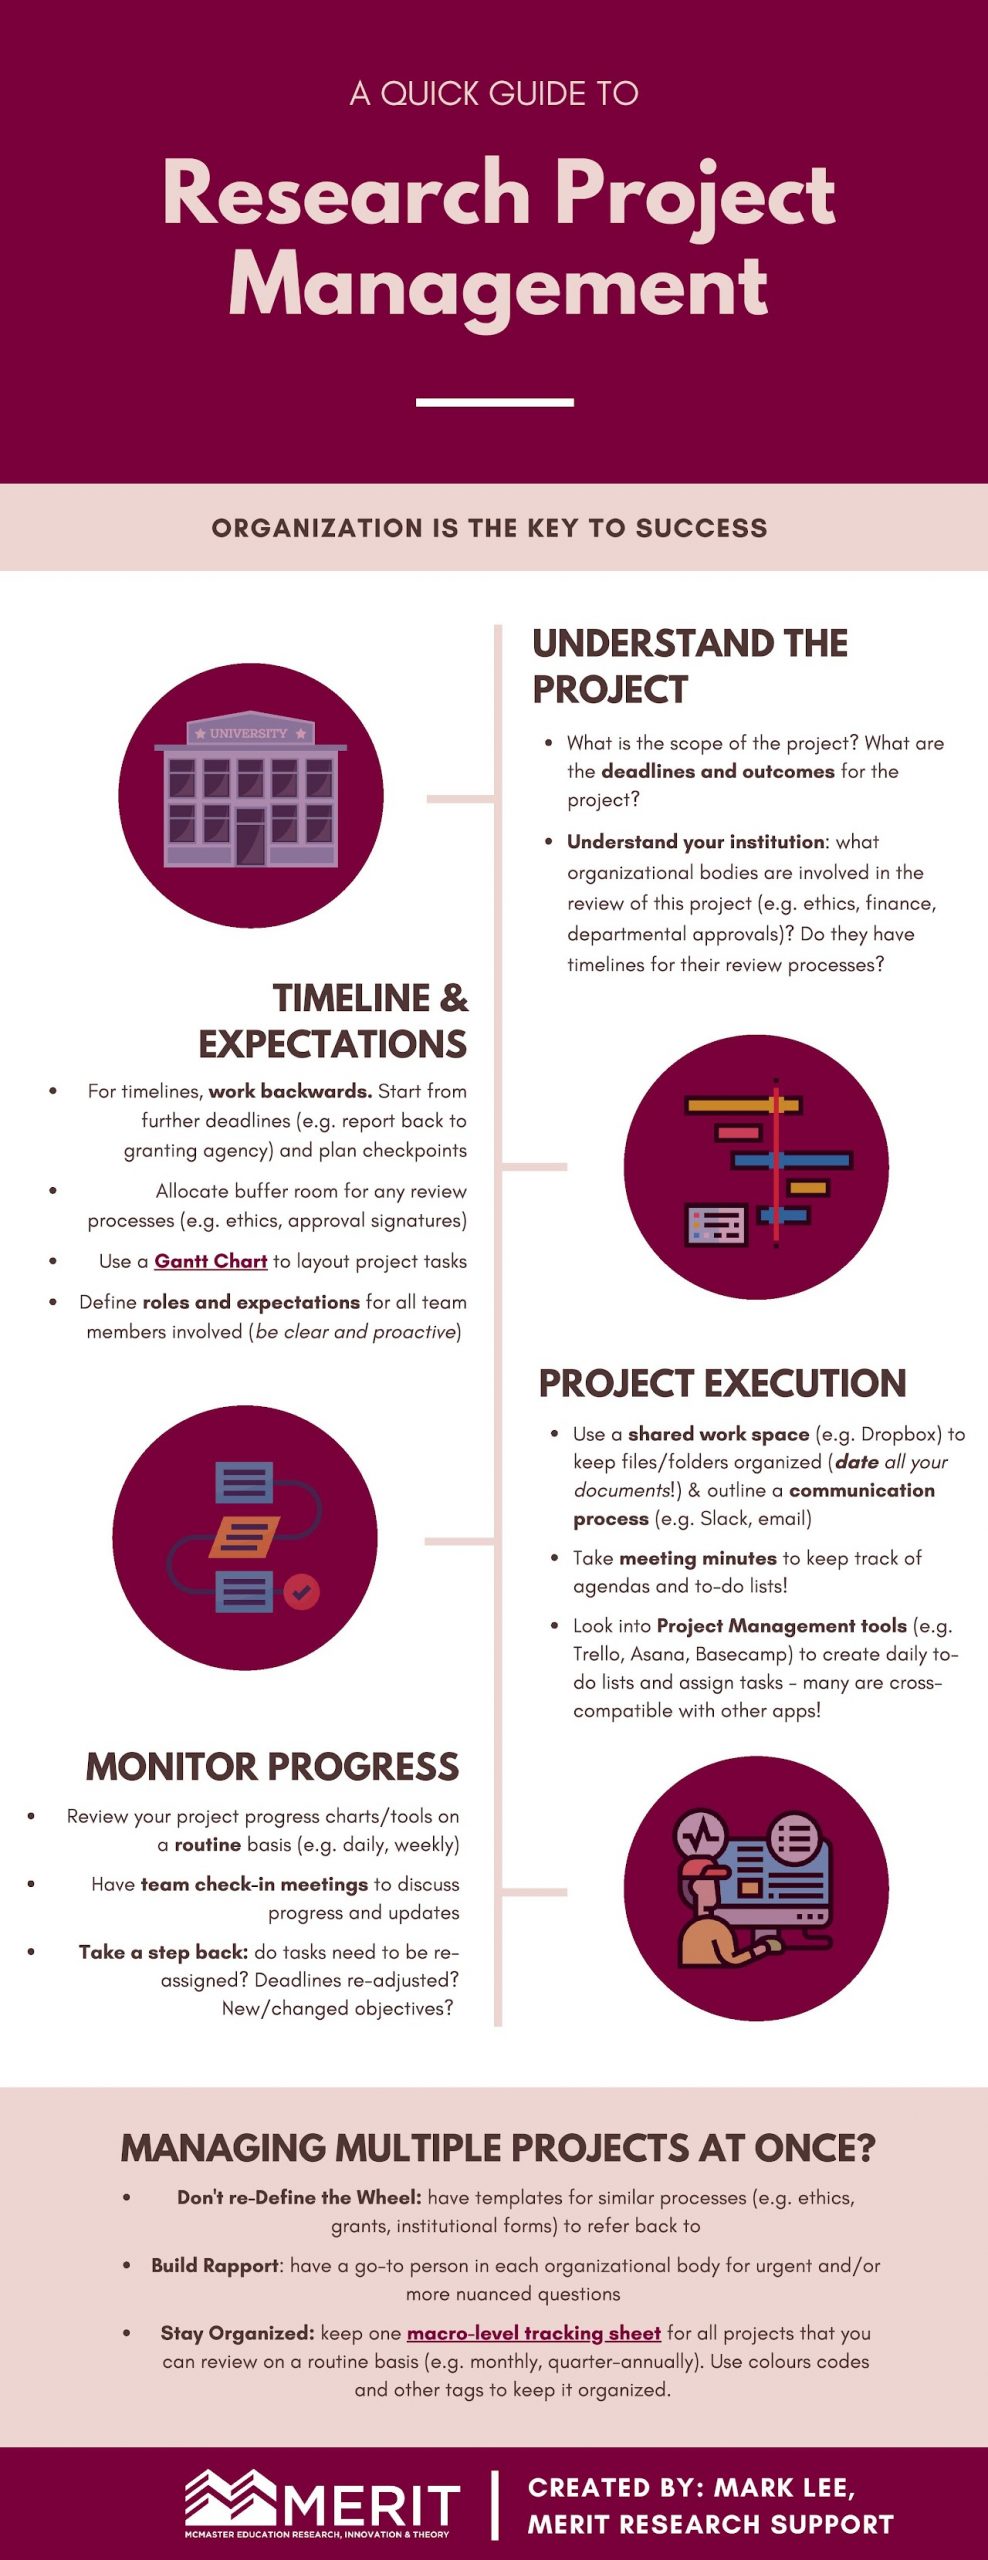 Infographic. A quick guide to Research Project Management. Organization is the key to success. Step 1: Understand the project: What is scope of the project? What are the deadlines and outcomes for the project? Understand the institution: what organizational bodies are involved in the review of this project (e.g. ethics, finance, departmental approvals)? Do they have timelines for their review processes? Step 2: Timelines & ExpectationsFor timelines, work backwards. Start from further deadlines (e.g. report back to granting agency) and plan checkpoints.Allocate buffer room for any review processes (e.g. ethics, approval signatures)Use a Gantt Chart to layout project tasks.Define roles and expectations for all team members involved (be clear and proactive) Step 3: Project ExecutionUse a shared work space (e.g. Dropbox) to keep your files/folders organized (date all your documents!) & outline a communication process (e.g. Slack, email). Take meeting minutes to keep track of agendas and to-do lists! Look into Project Management tools (e.g. Trellow, Asana, Basecamp) to create daily to-do lists and assign tasks - many are cross-compatible with other apps! Step 4: Monitor ProgressReview your project progress charts/tools on a routine basis (e.g. daily, weekly).Have team check-in meetings to discuss progress and updates.Take a step back: do tasks need to be reassigned? Deadlines re-adjusted? New/changed objectives? Managing Multiple Projects at Once?Don't re-define the wheel: have templates for similar processes (e.g. ethics, grants, institutional forms) to refer back to.Build Rapport: have a go-to-person in each organizational body for urgent and/or more nuanced questions.Stay Organized: keep one macro-level tracking sheet for all projects that you can review on a routine basis (e.g. monthly, quarterly-annually). Use colours codes and other tags to keep it organized. Created by Mark Lee, MERIT (McMaster Education Research, Innovation, and Theory) Research Support